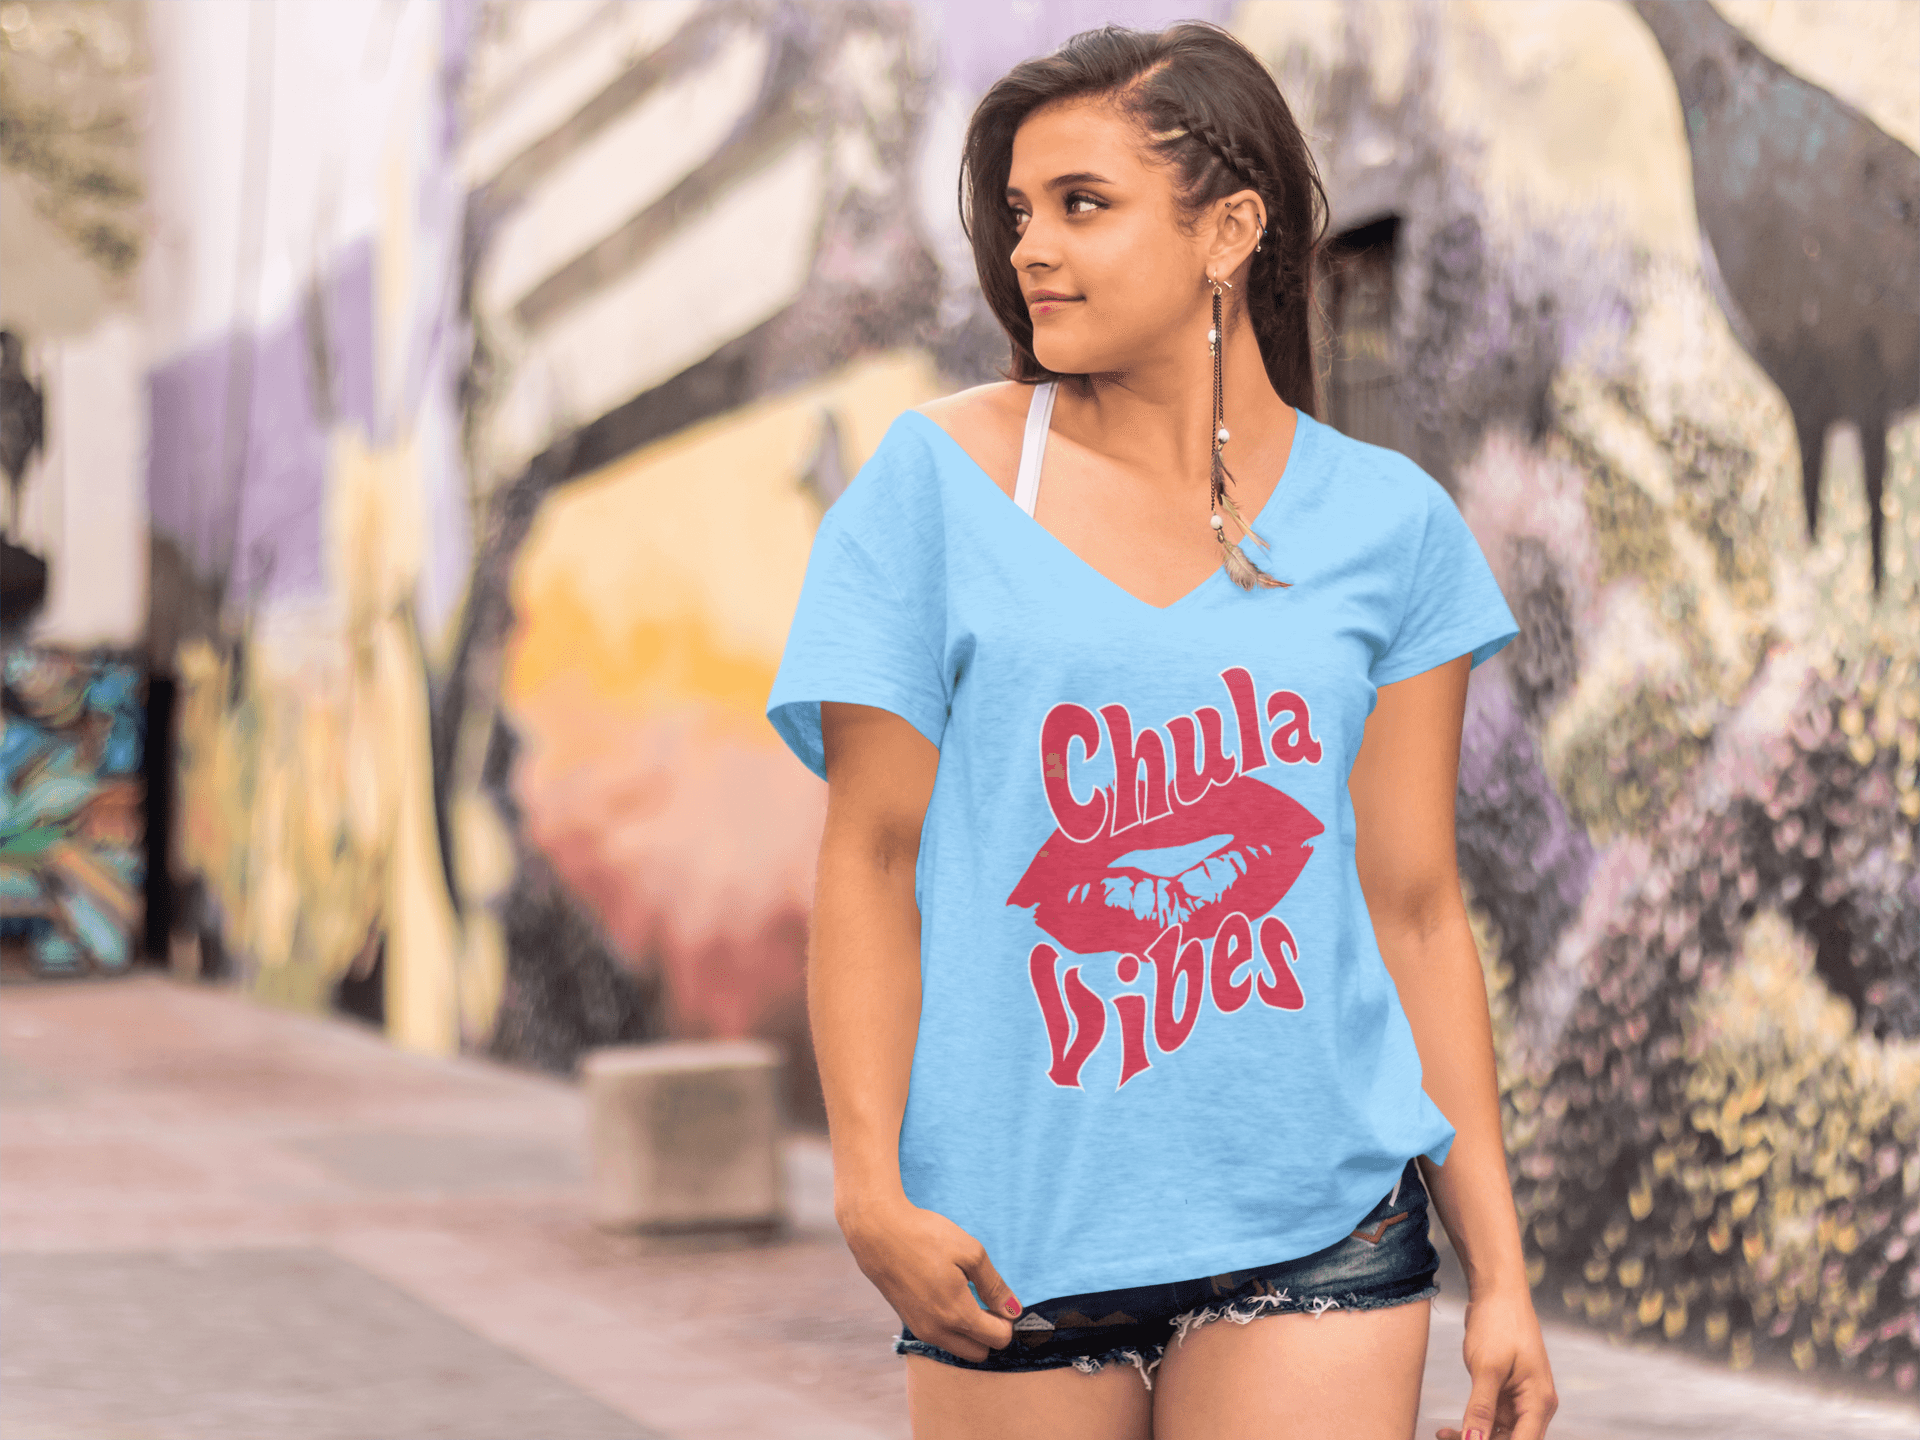 Teal V-neck t-shirt with the text, "Chula Vibes" in red ink and an image of lips. This cute tee comes in sizes small thru 3XL. It is available at www.sanchezhere.com